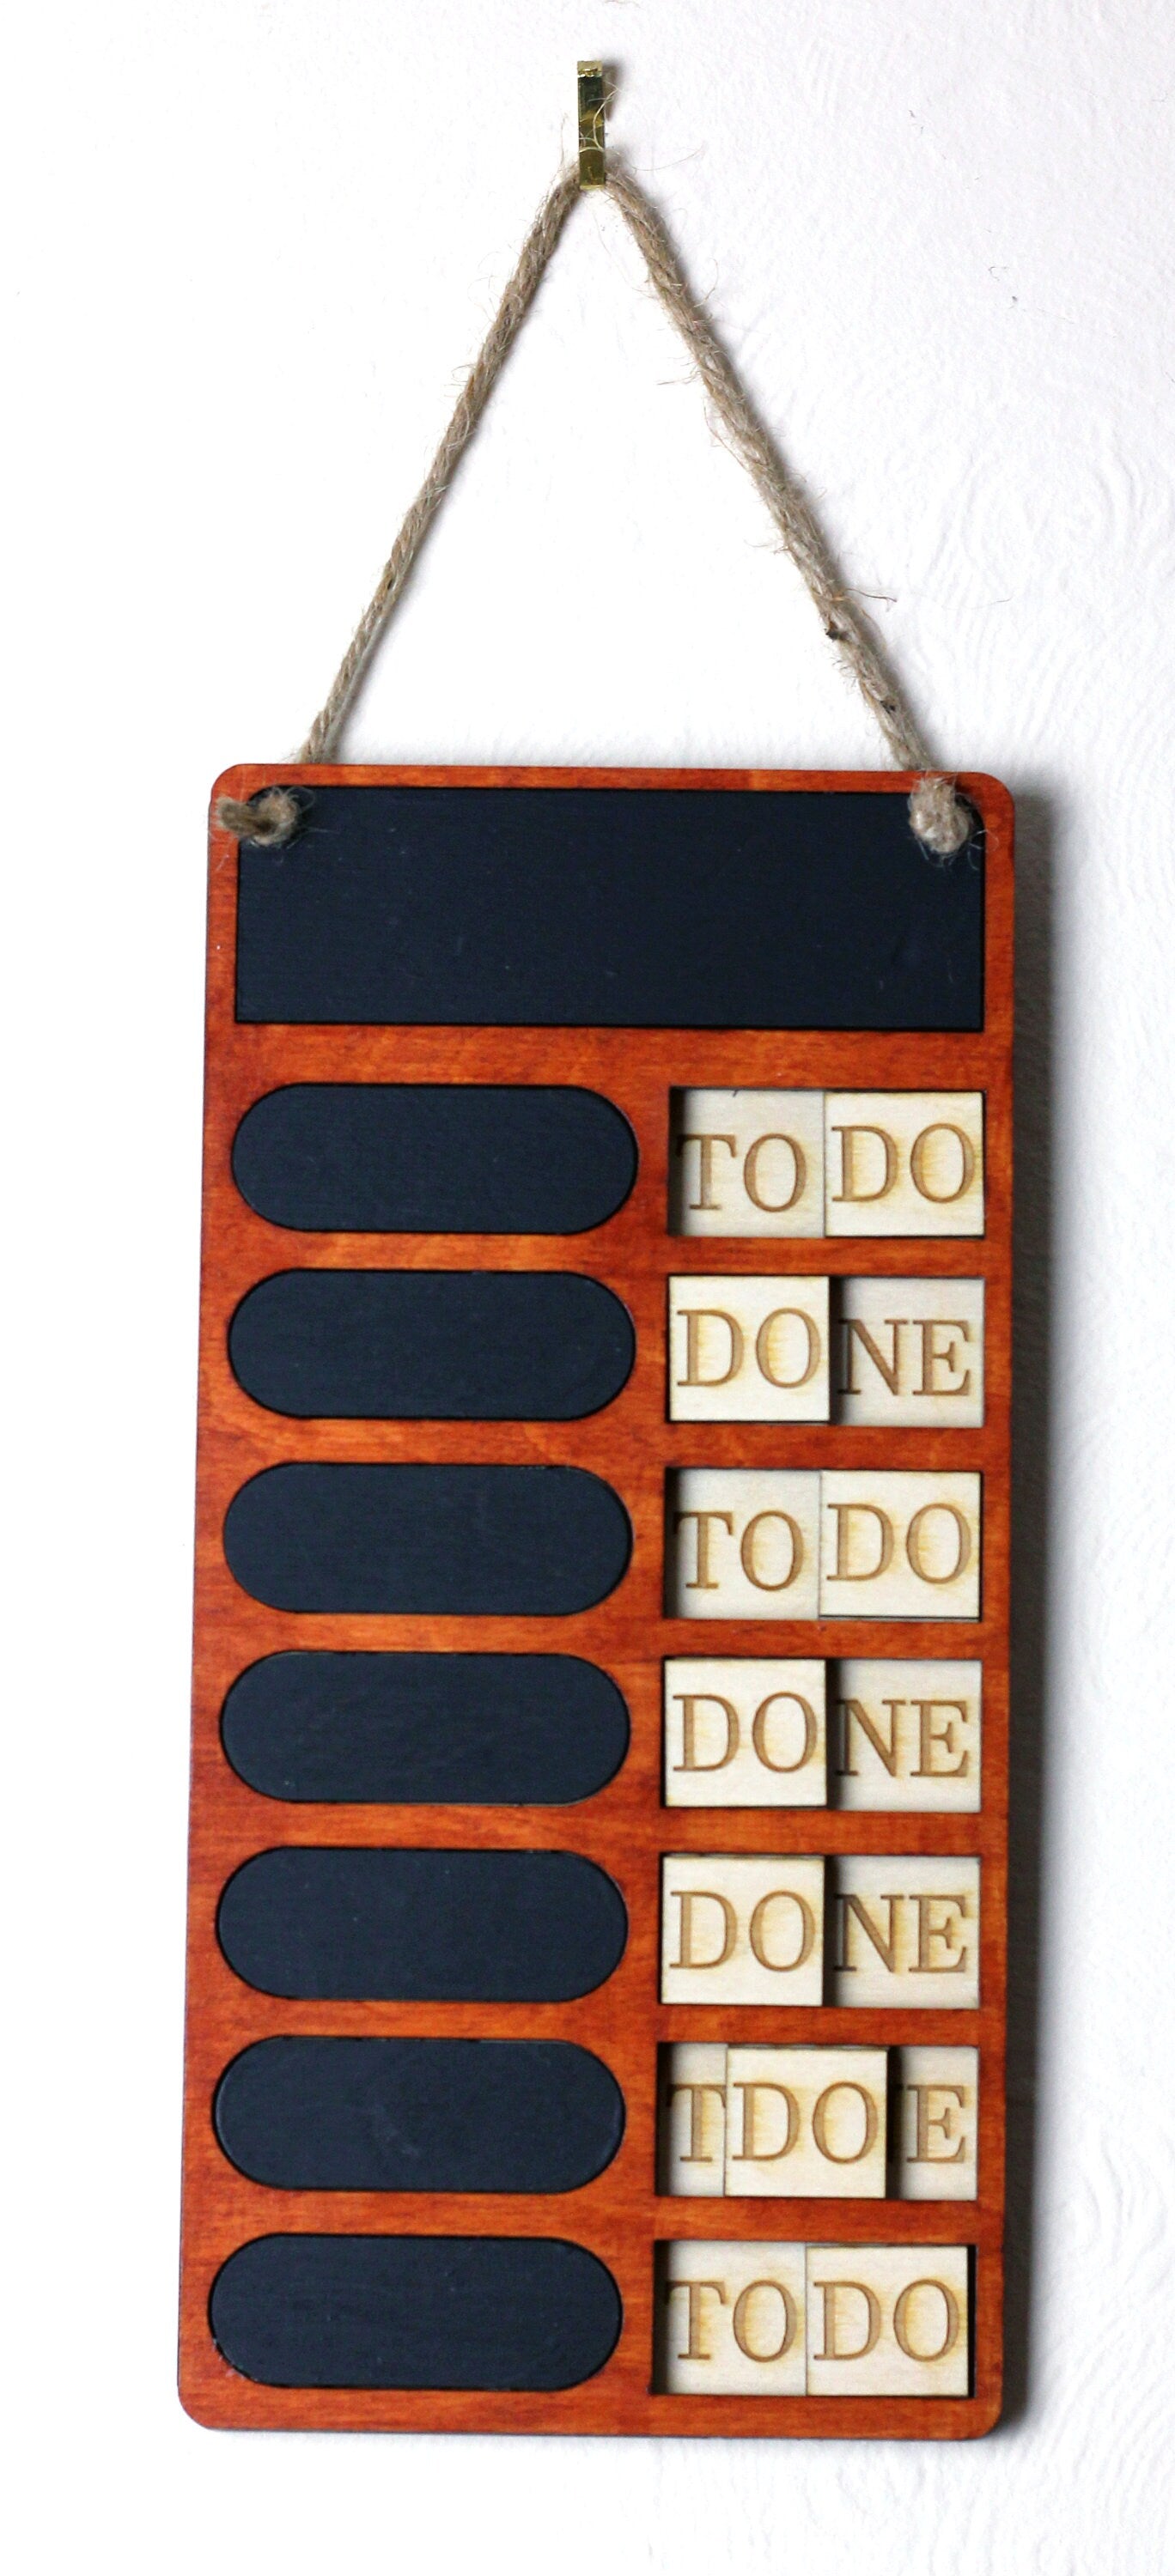 Custom wooden chore chart, record chores and tasks on this editable weekly chore board, wooden to do and task tracker, make it magnetic